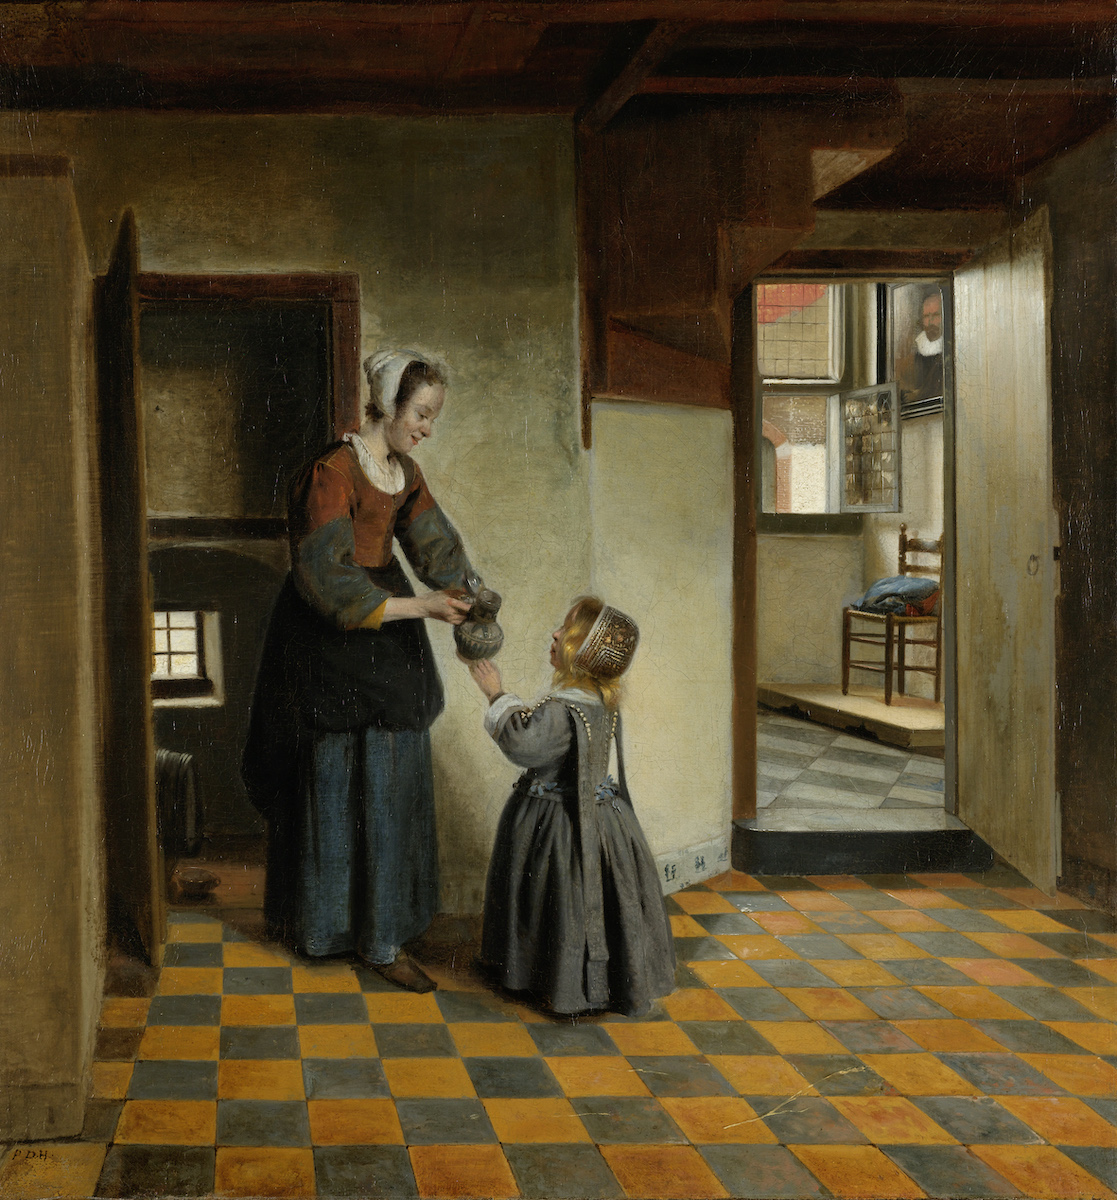 Woman with a Child in a Pantry, c. 1656-1600. Amsterdam, Rijksmuseum